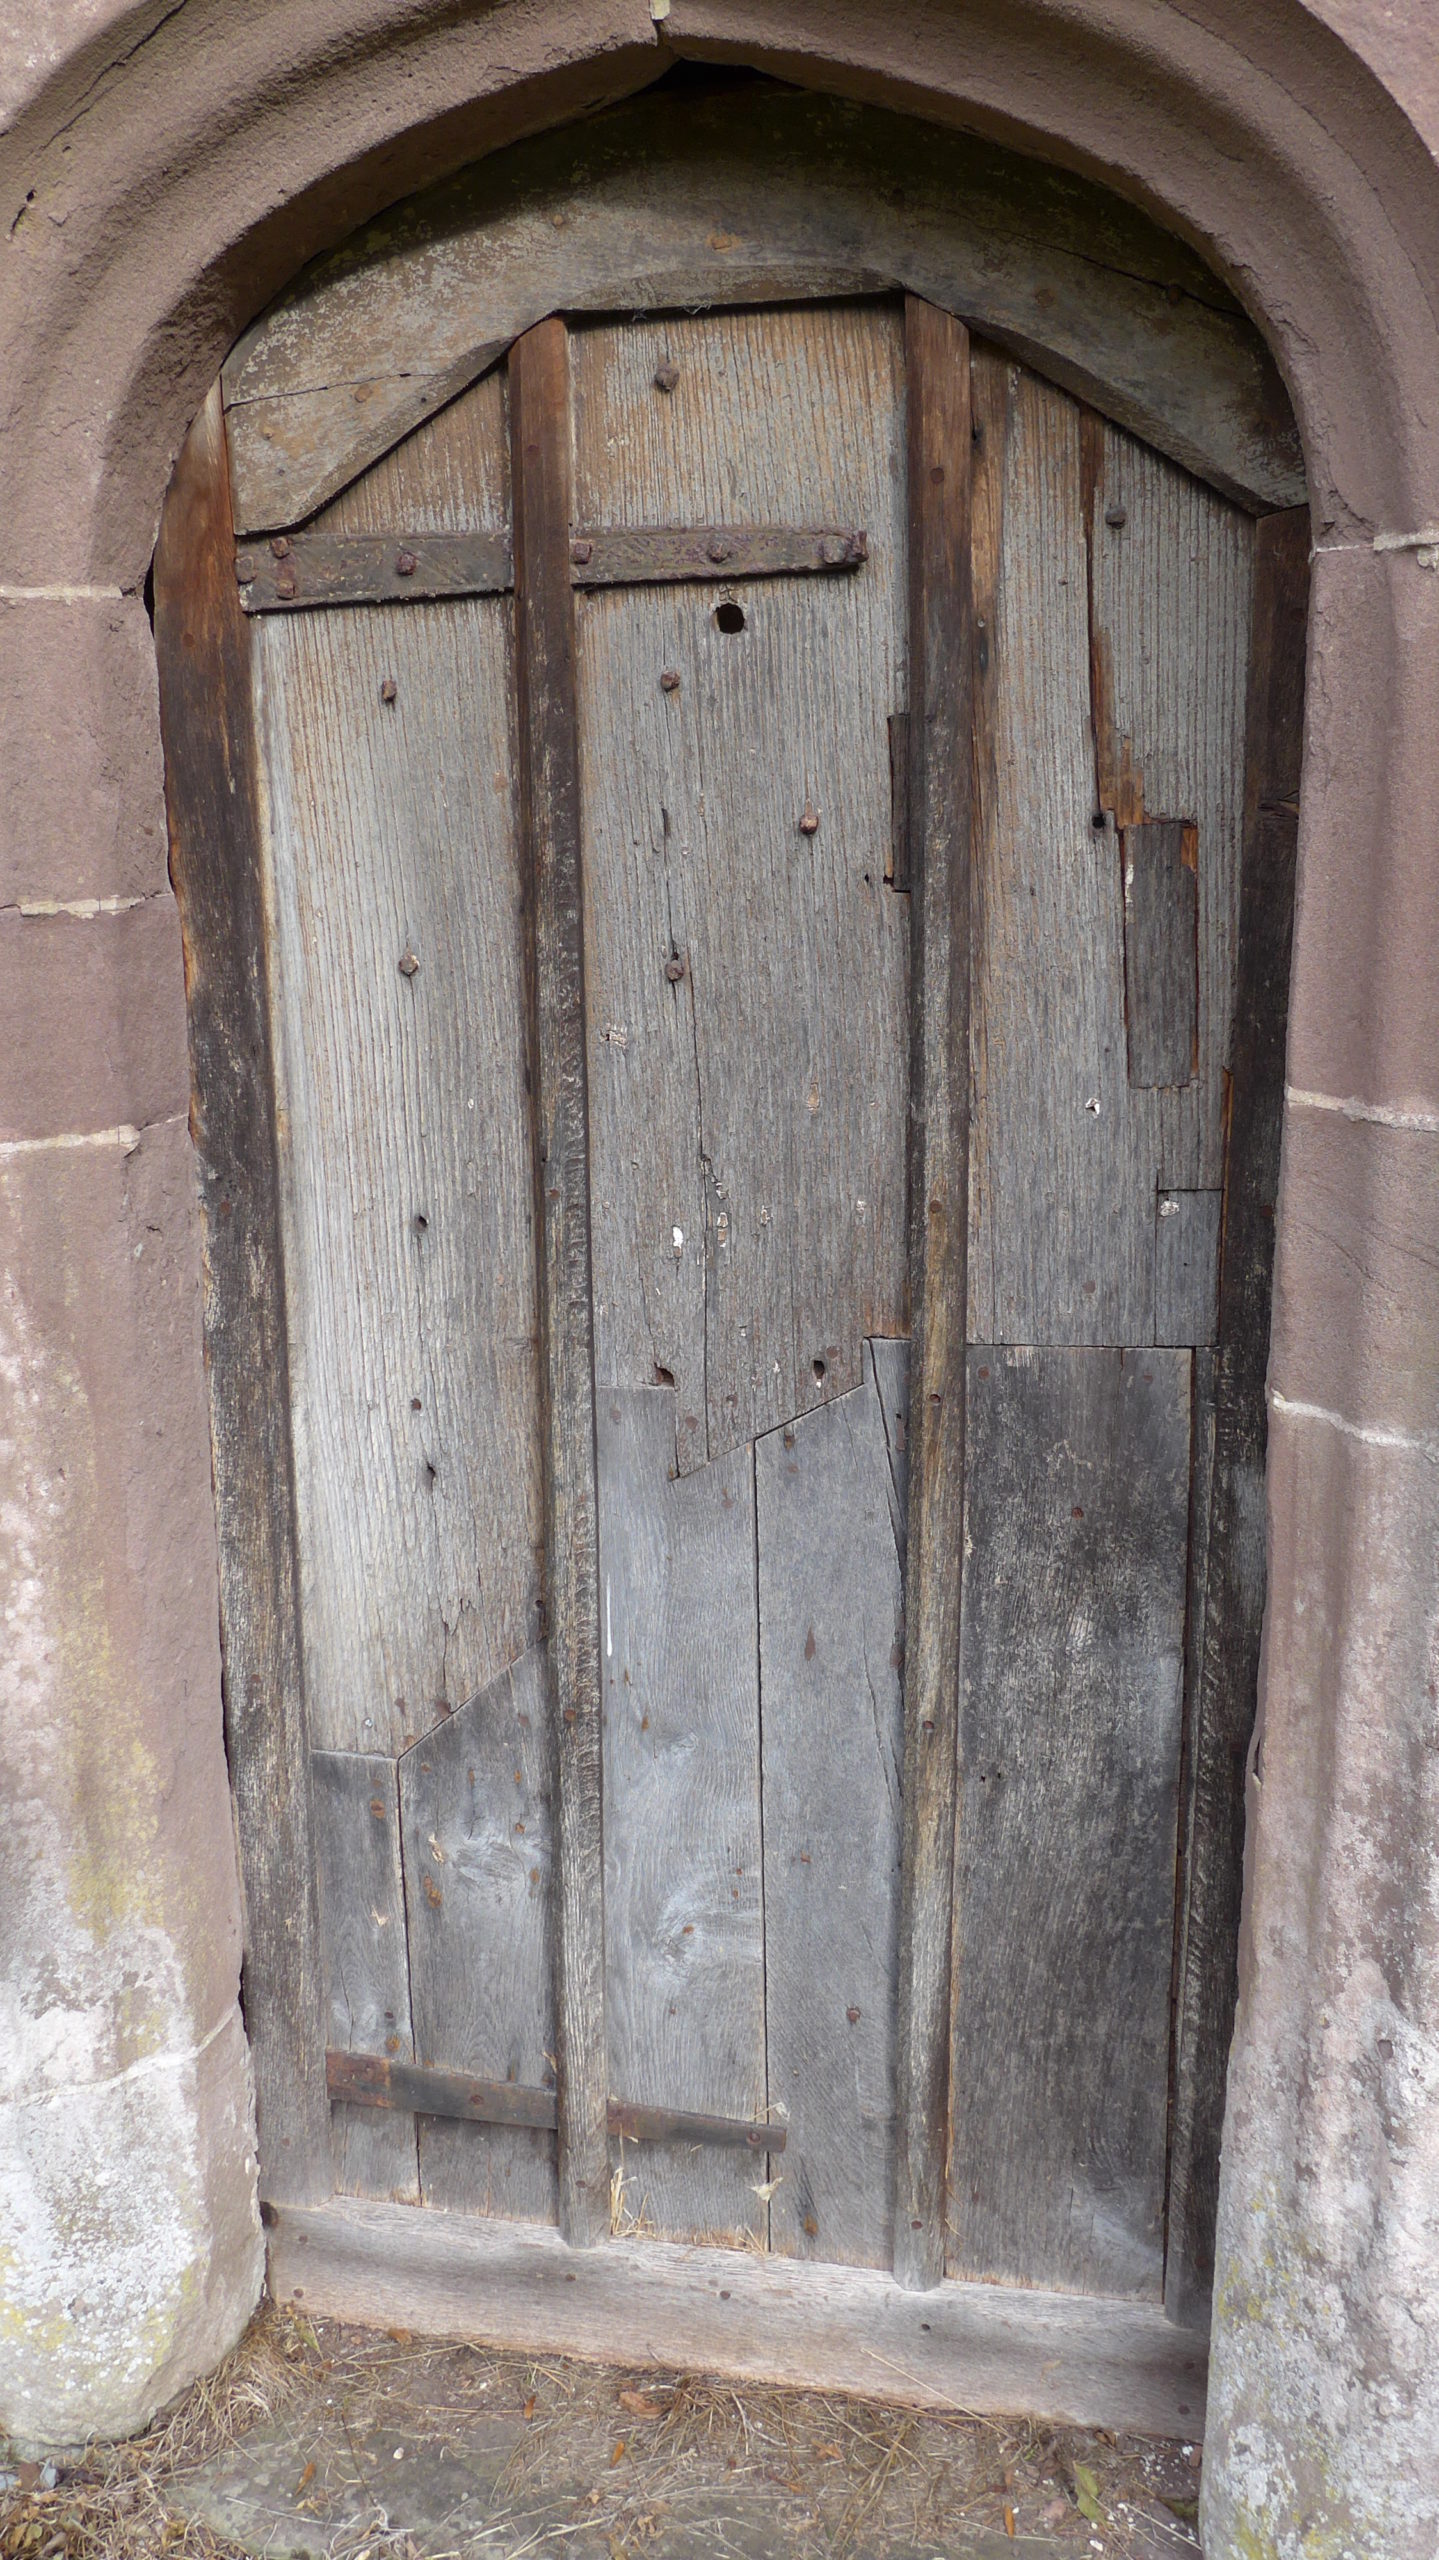 Llandetty Church with bullet hole in the door